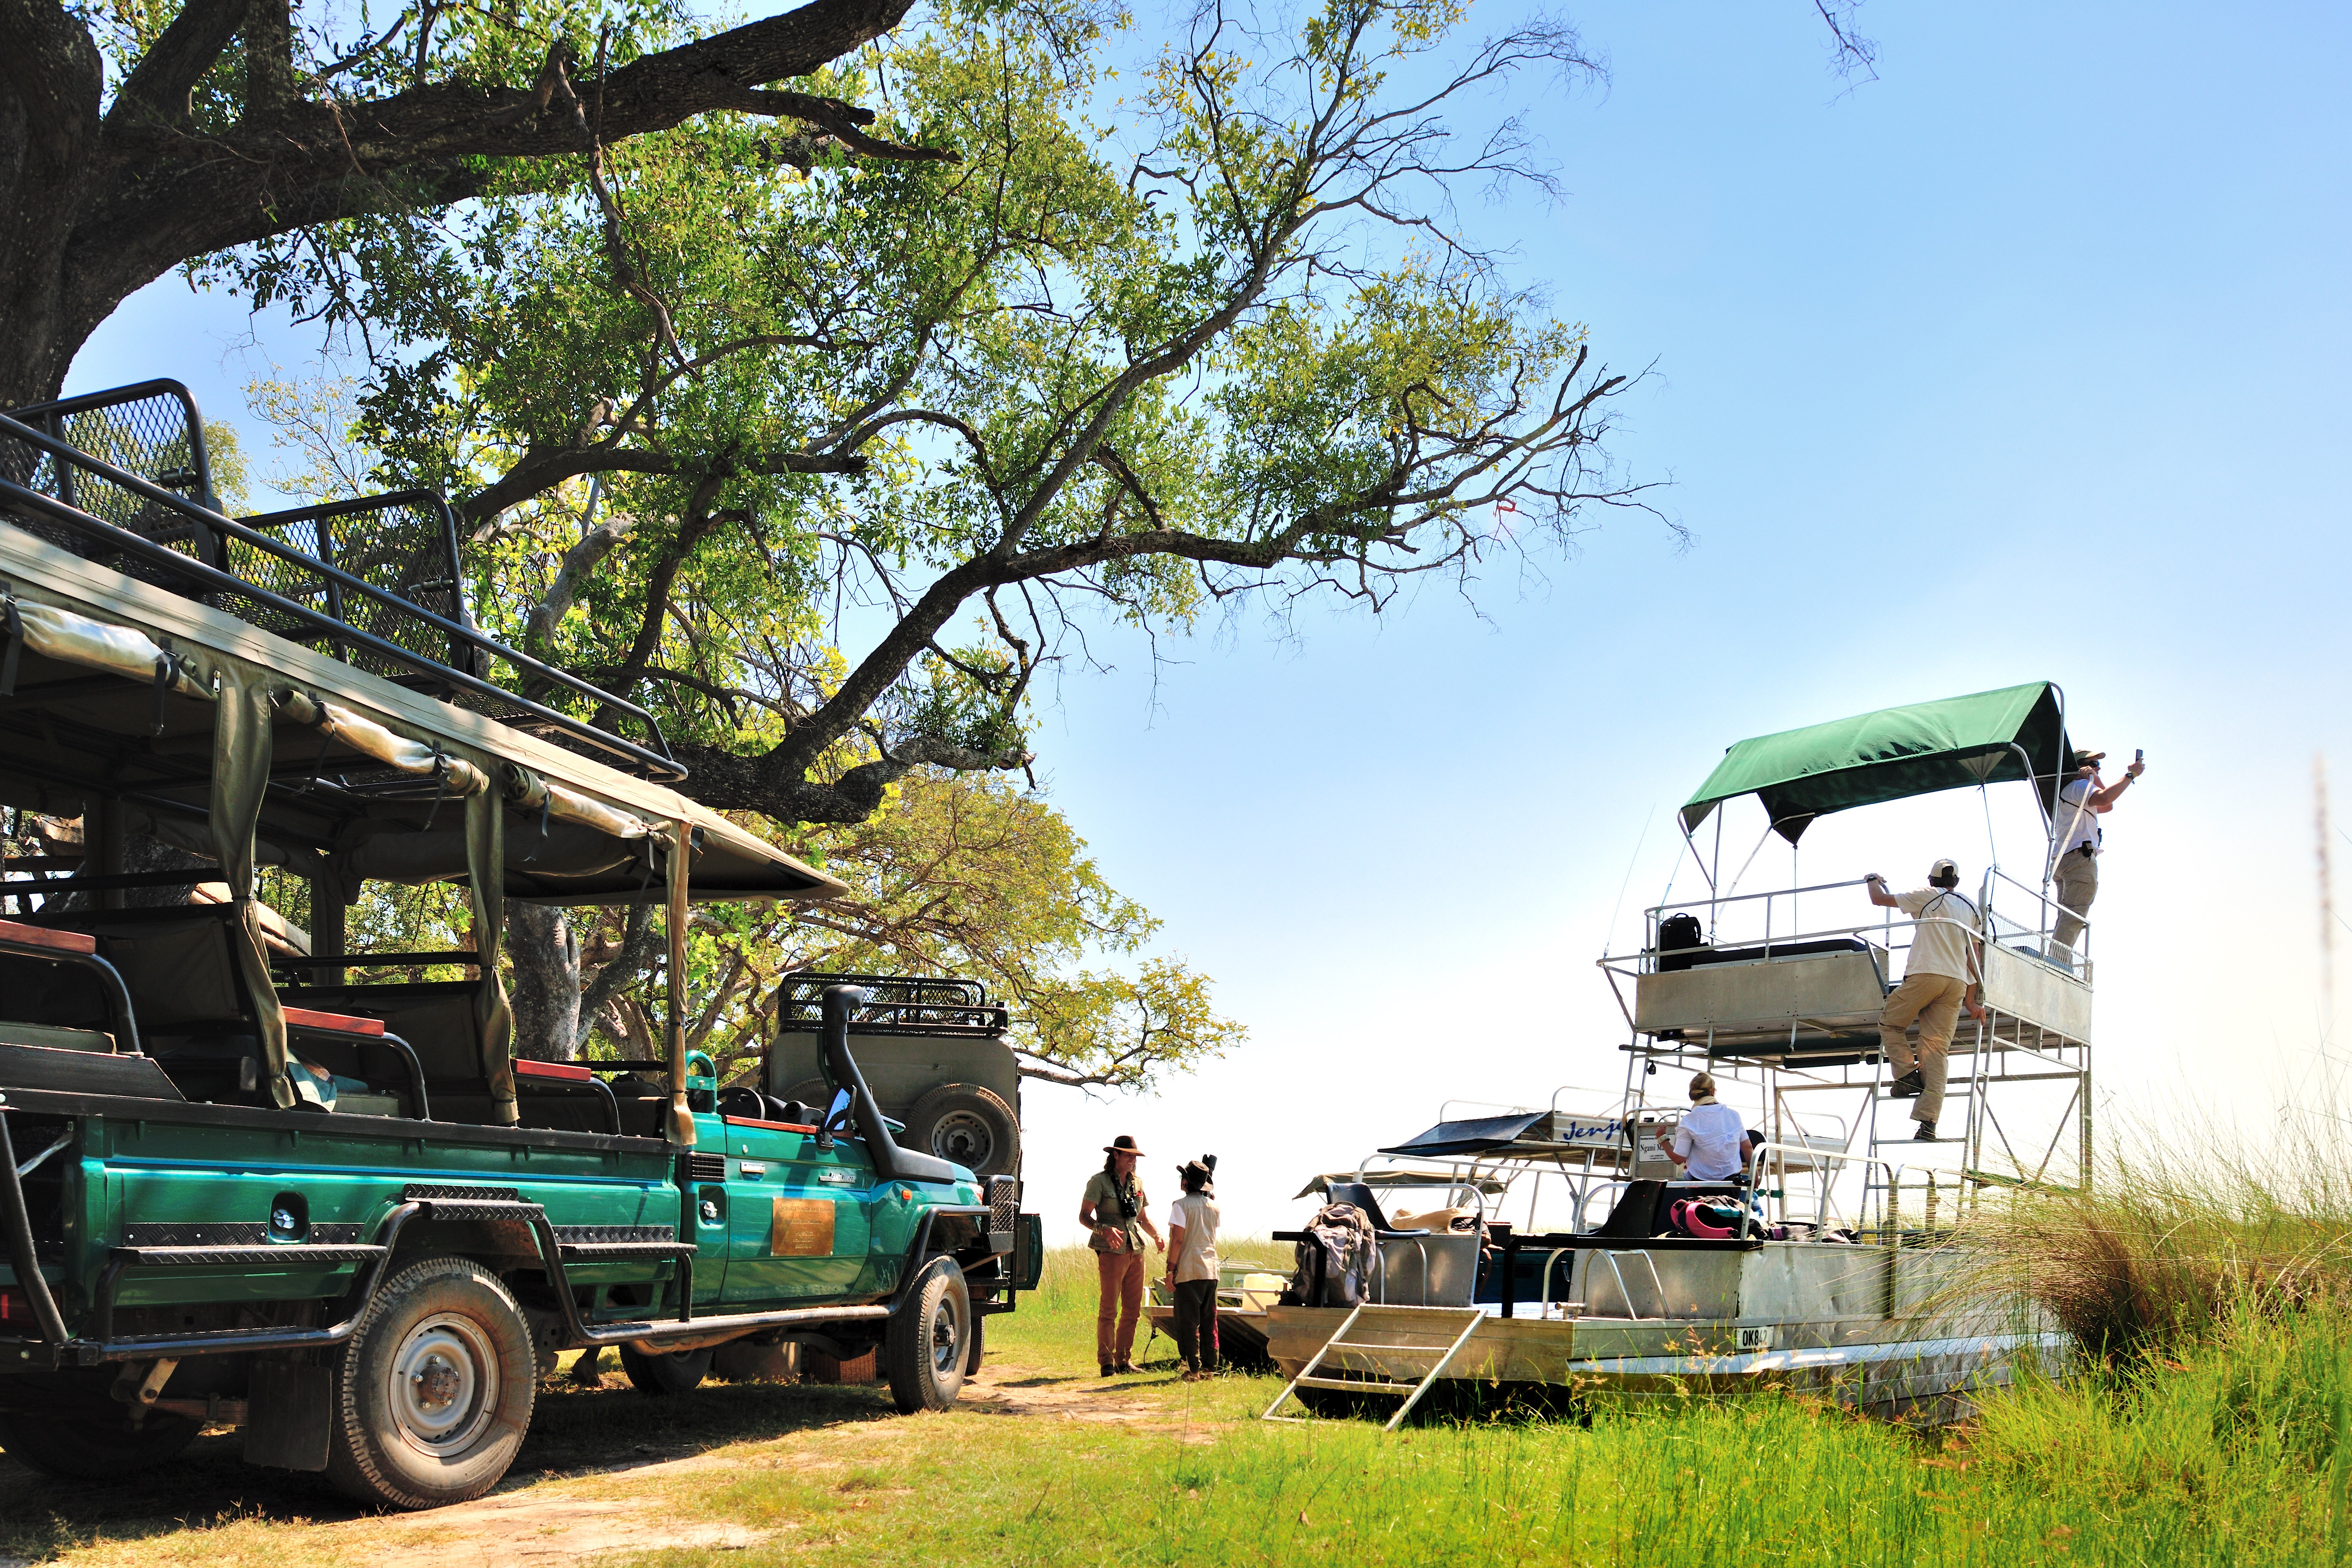 Instead of just being stationed at one site, guests on Ralph Bousfield’s mobile camping safari tour are taken to different parts of Botswana. Photos: David De Vleeschauwer